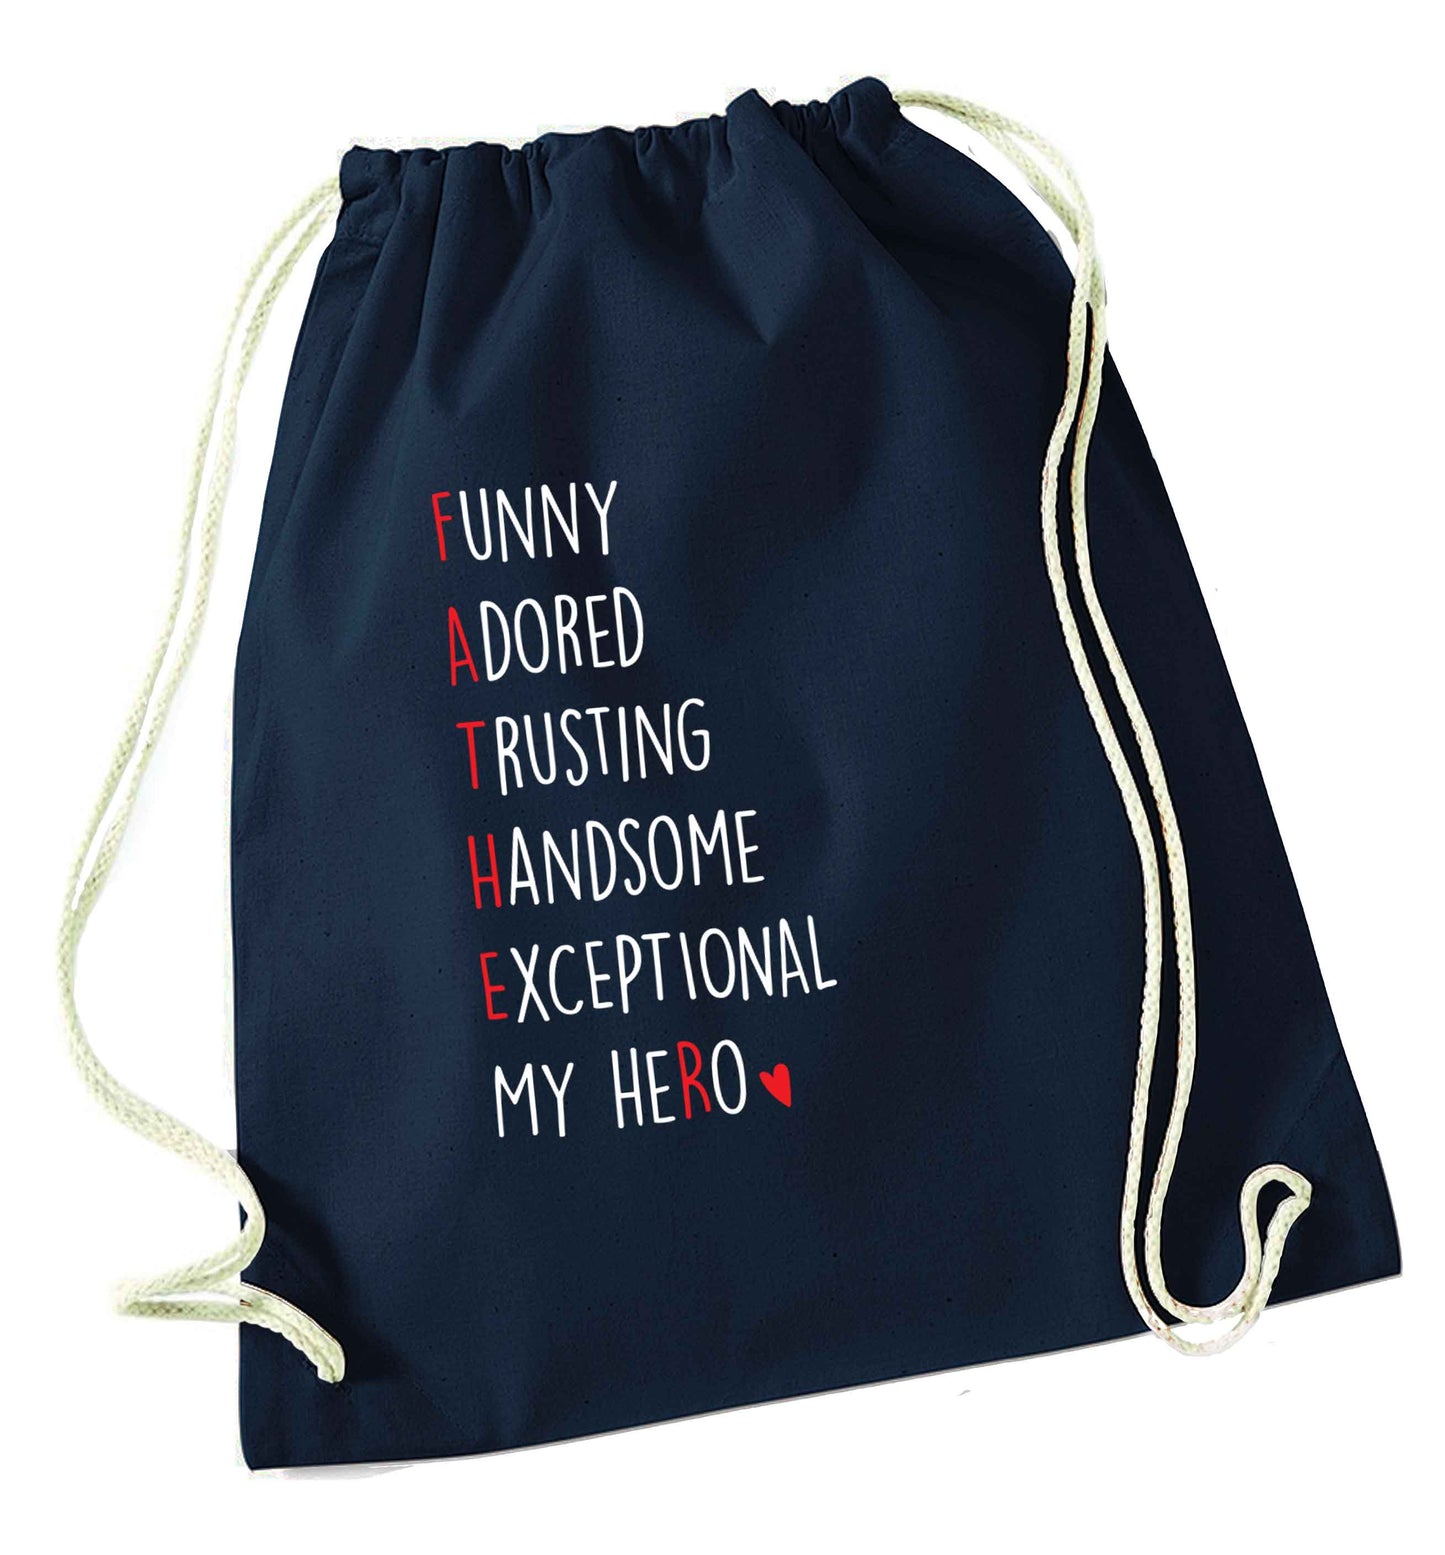 Father meaning hero acrostic poem navy drawstring bag